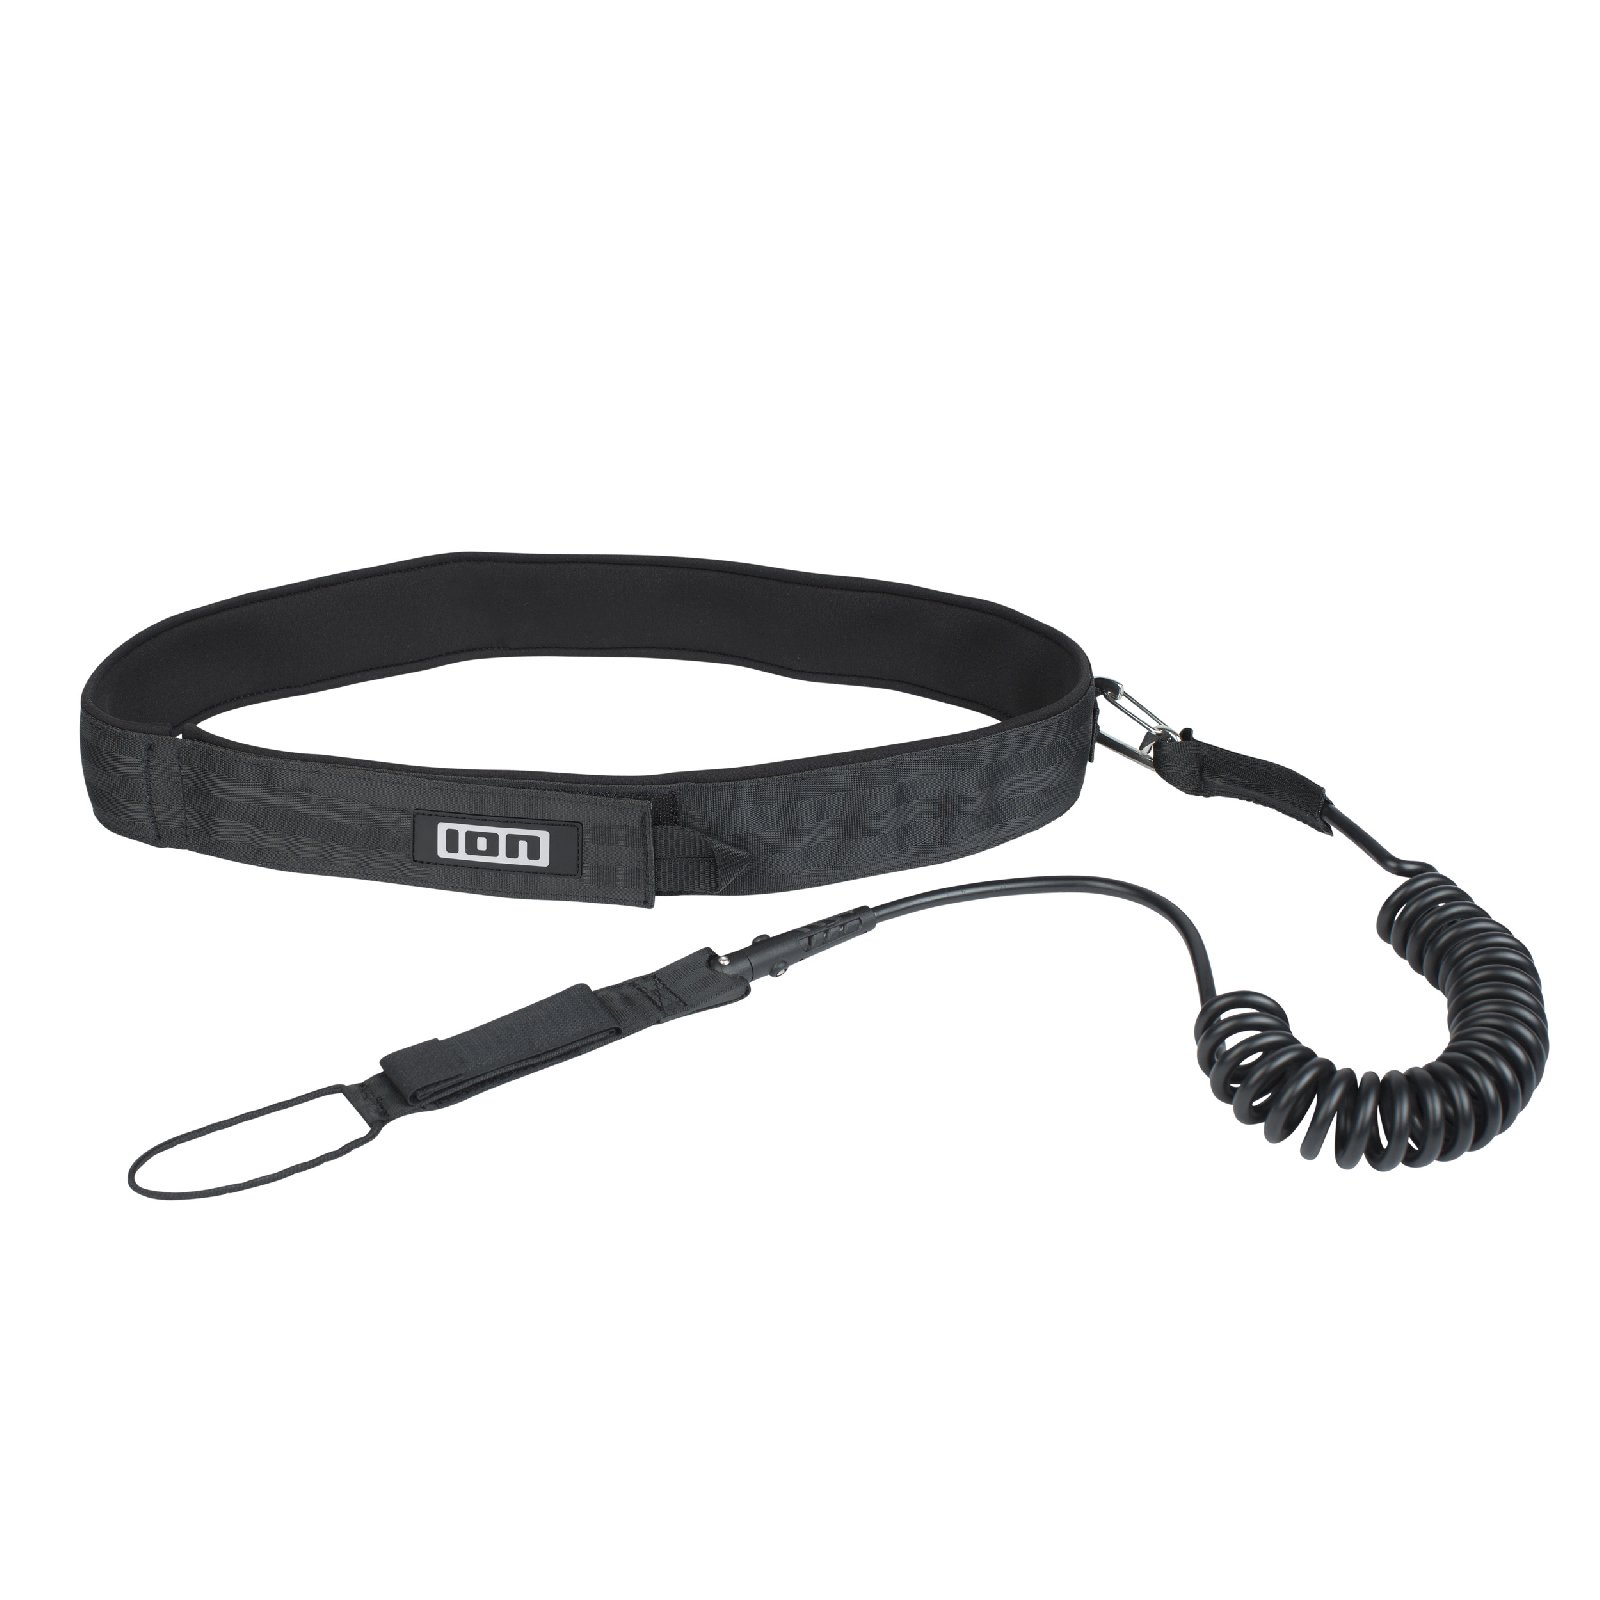 ION  SUP/WING Core Leash coiled hipbelt 8'  S-M (48700-7052)  24-